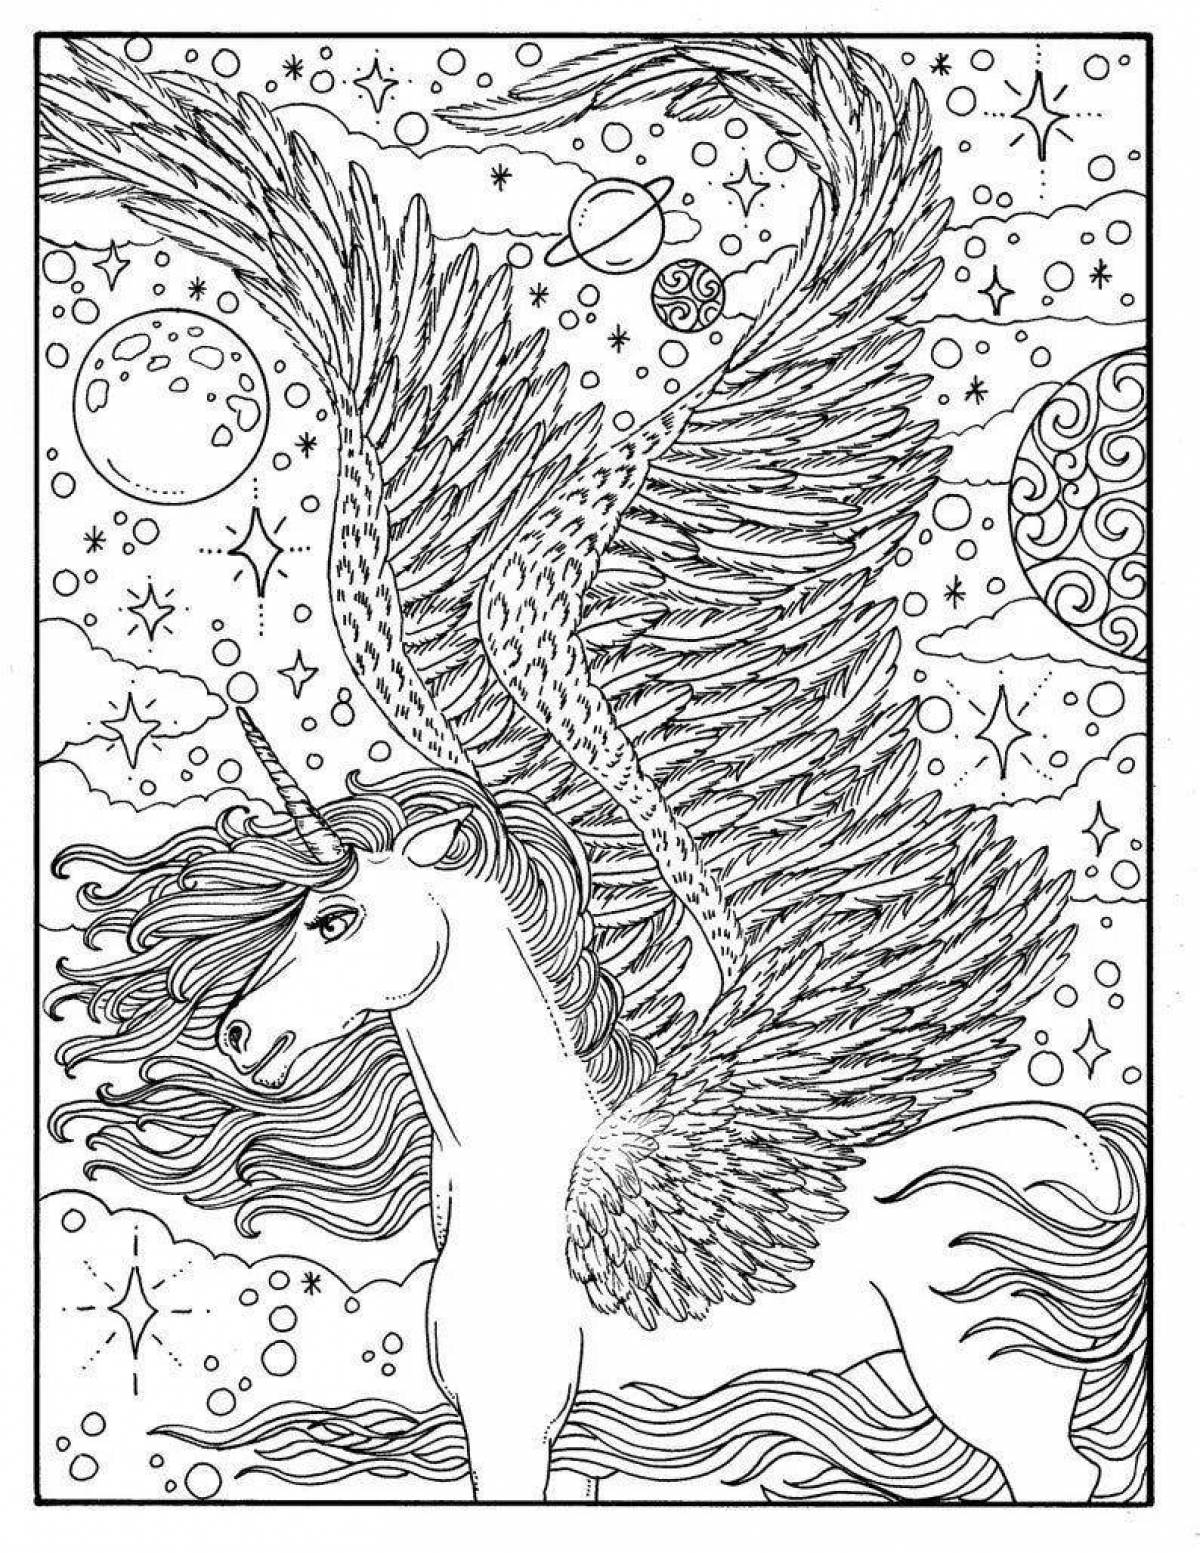 Amazing antistress unicorn coloring book for kids